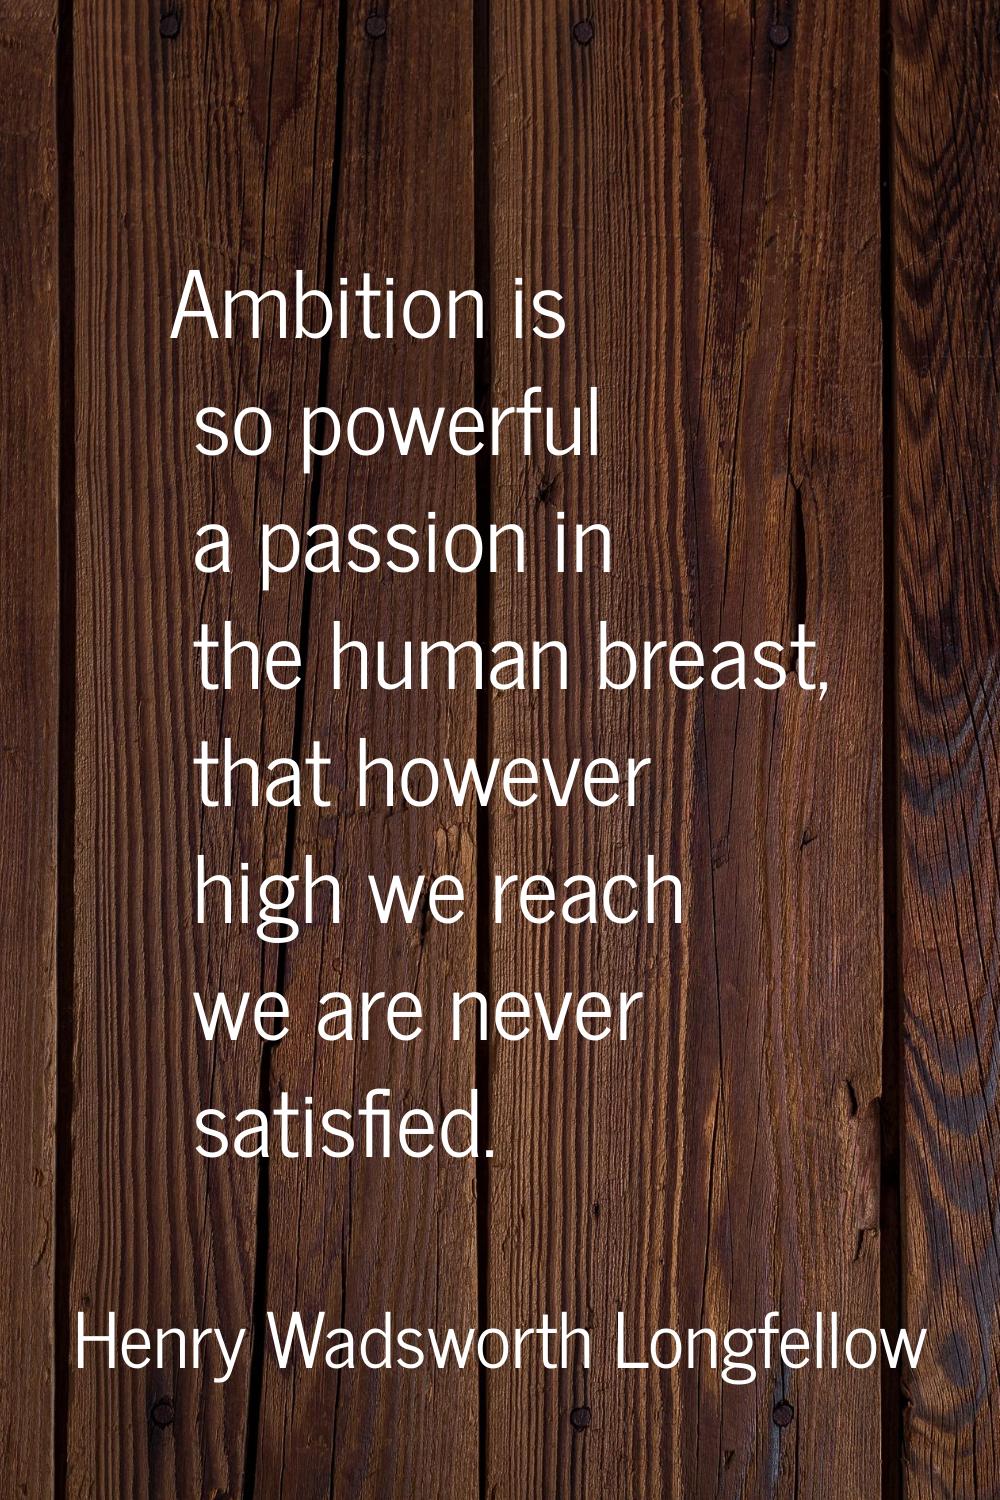 Ambition is so powerful a passion in the human breast, that however high we reach we are never sati